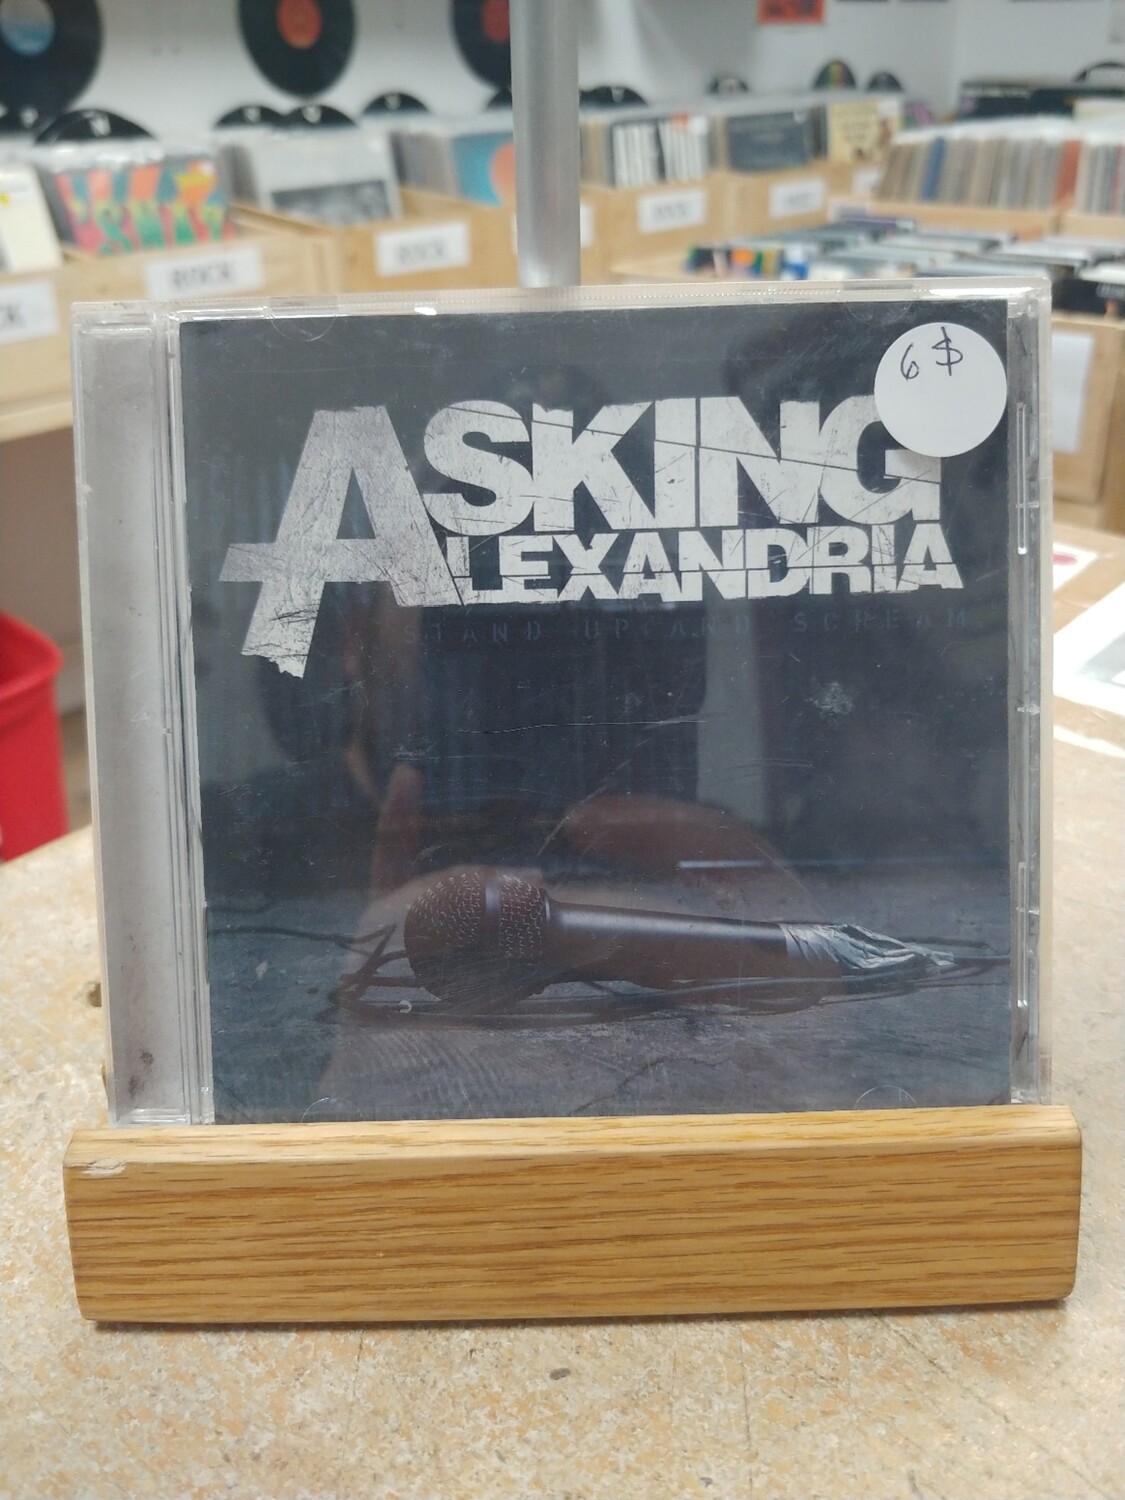 Asking Alexandria - Stand Up and Scream (CD)